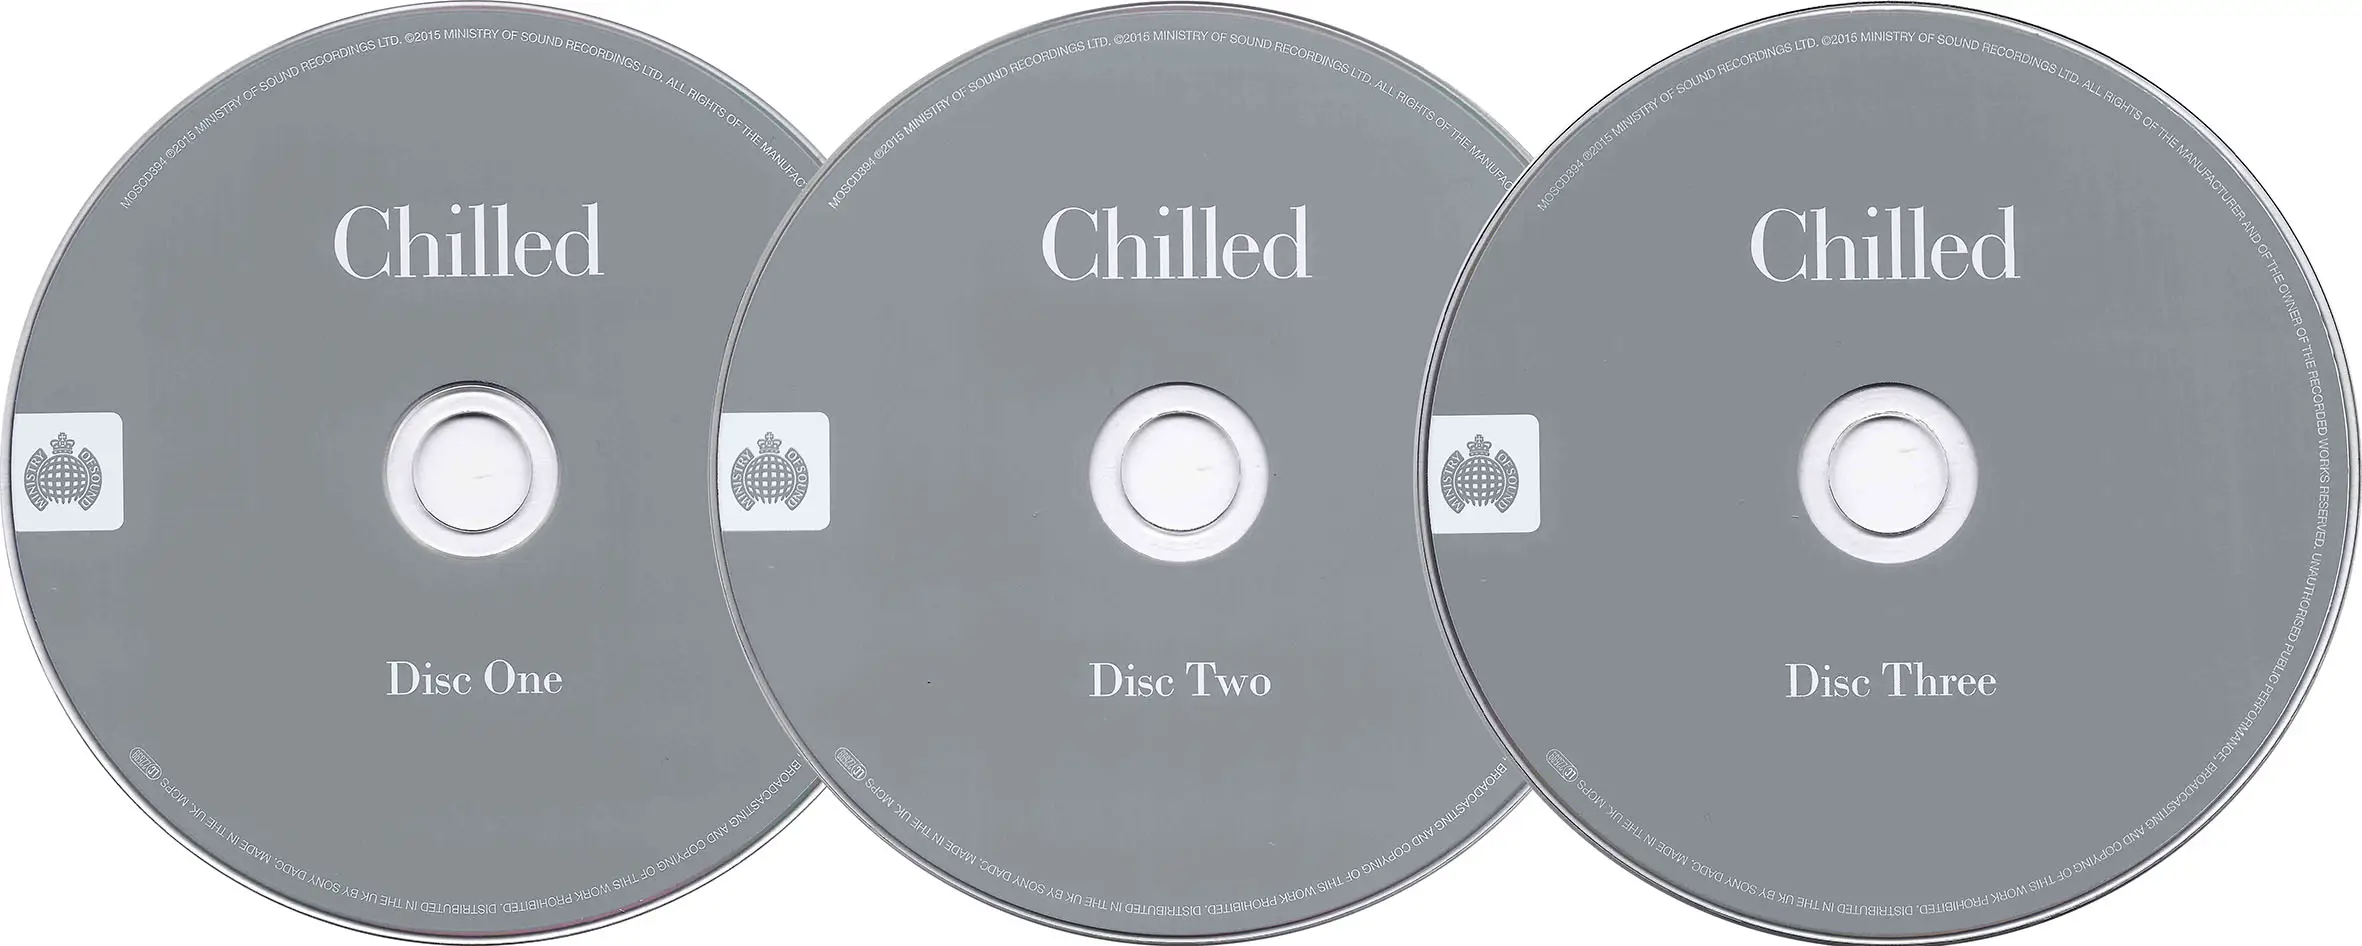 Sound chilling. Ministry of Sound Chilled. Ministry of Sound 2005 год двд. Ministry of Sound Chill 3 CD. Плеер Ministry of Sound mosmp083.